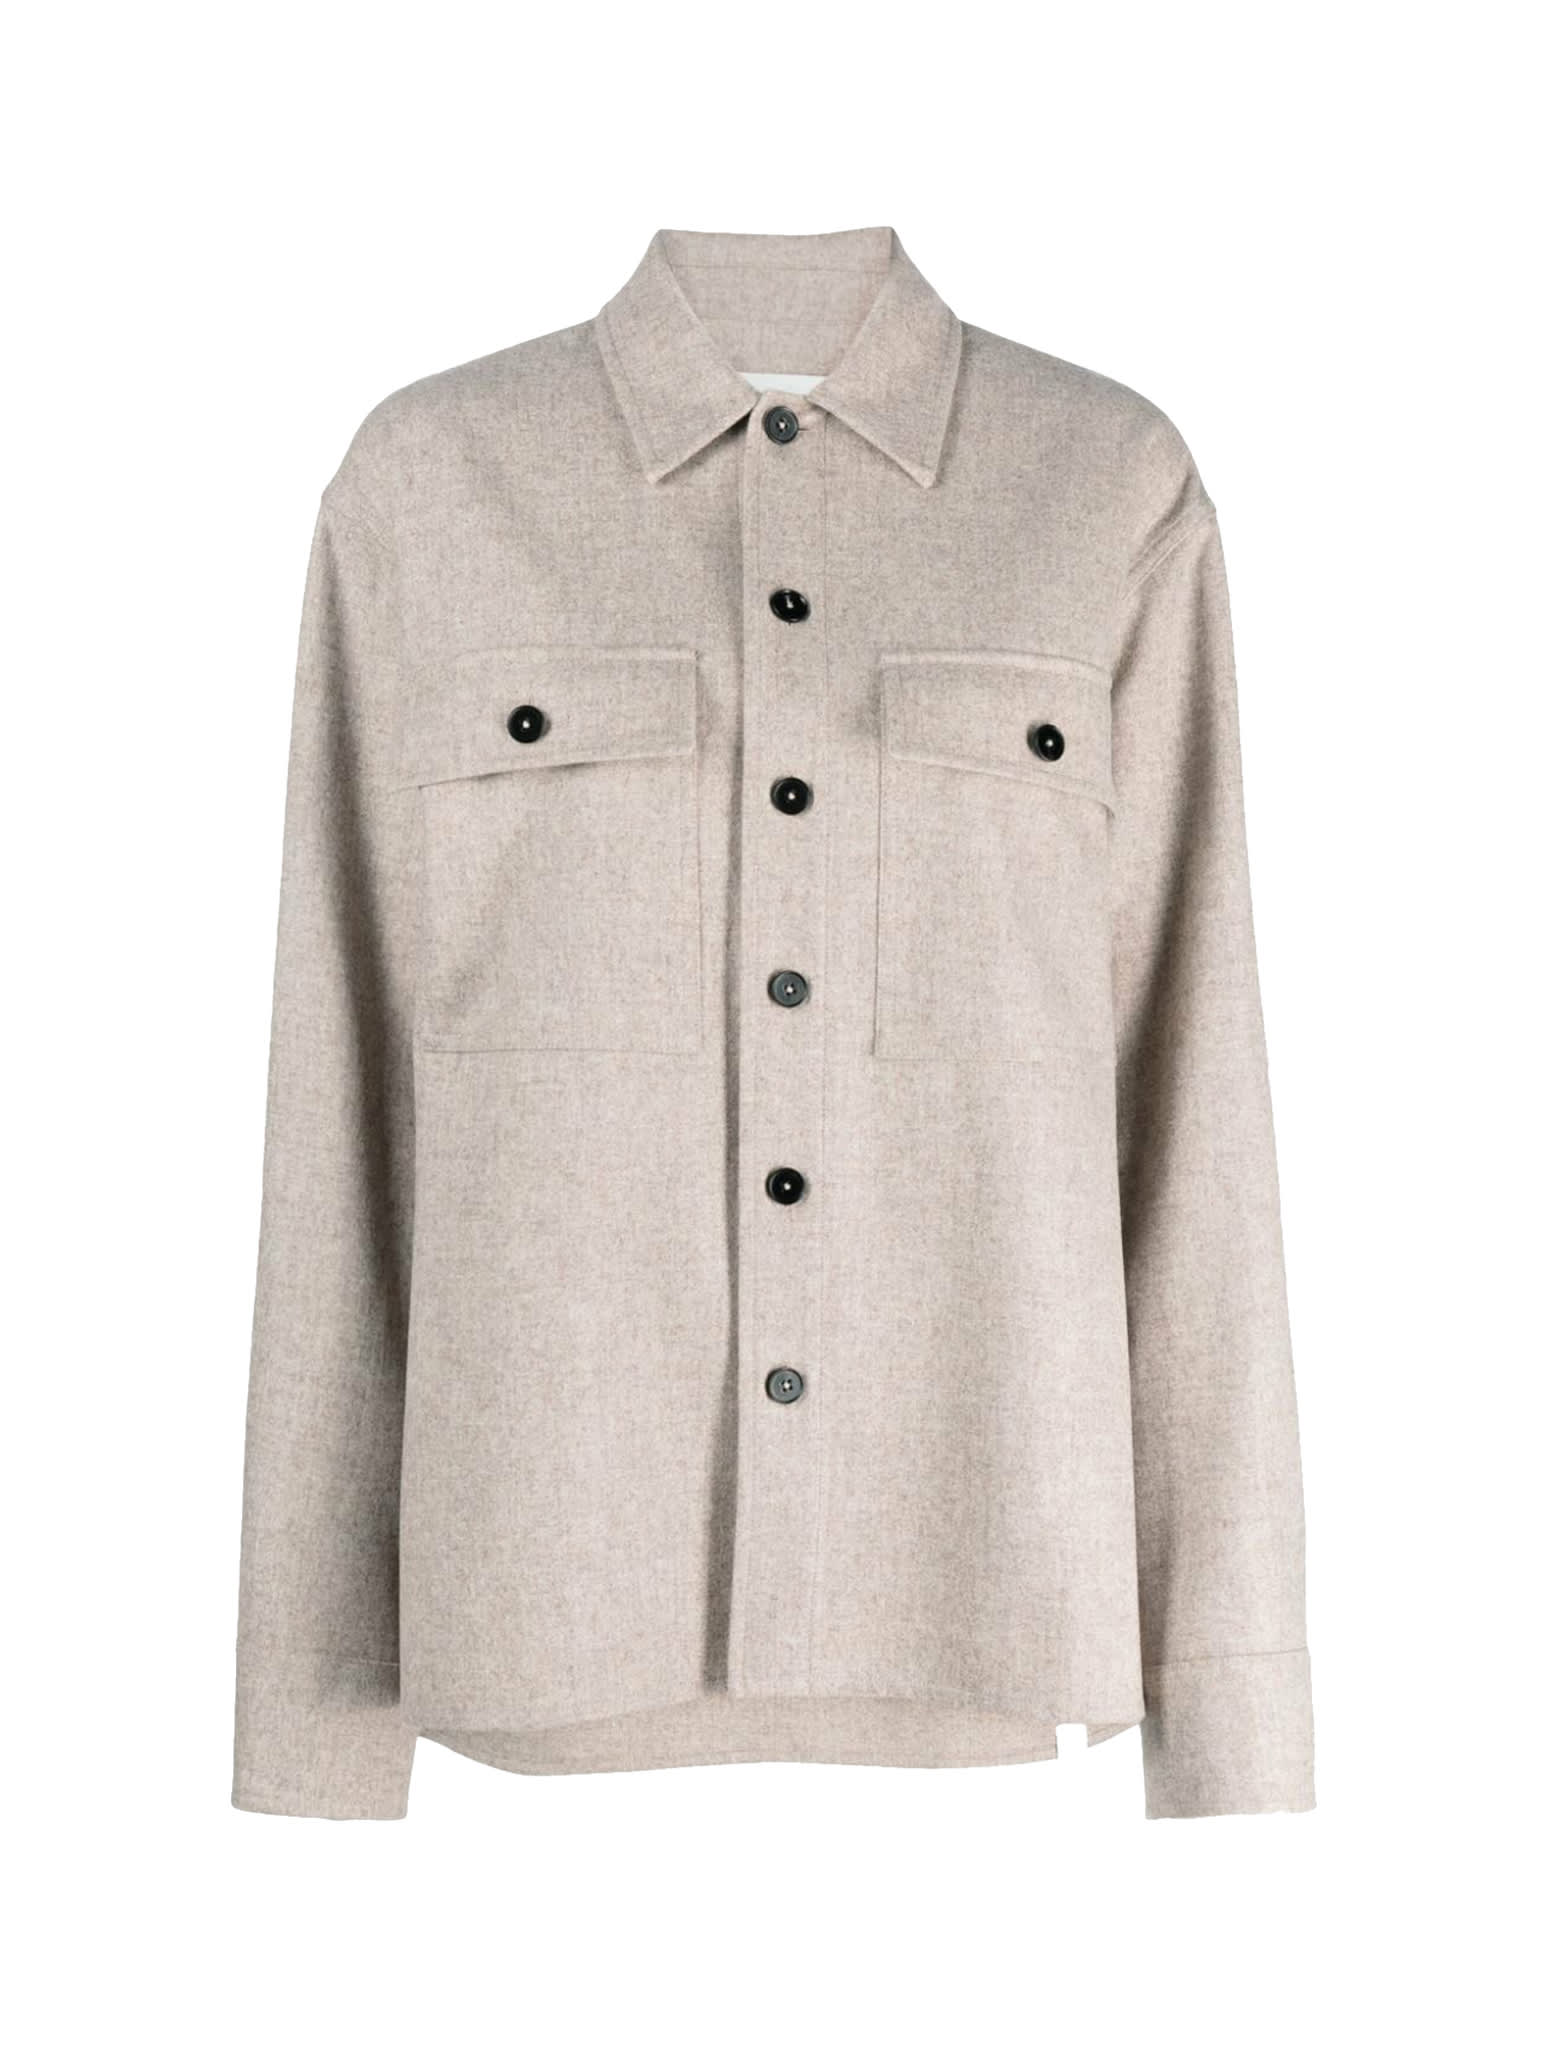 JIL SANDER LONG SLEEVE RELAXED FIT SHIRT WITH CHEST POCKETS AND SIDE SLIT